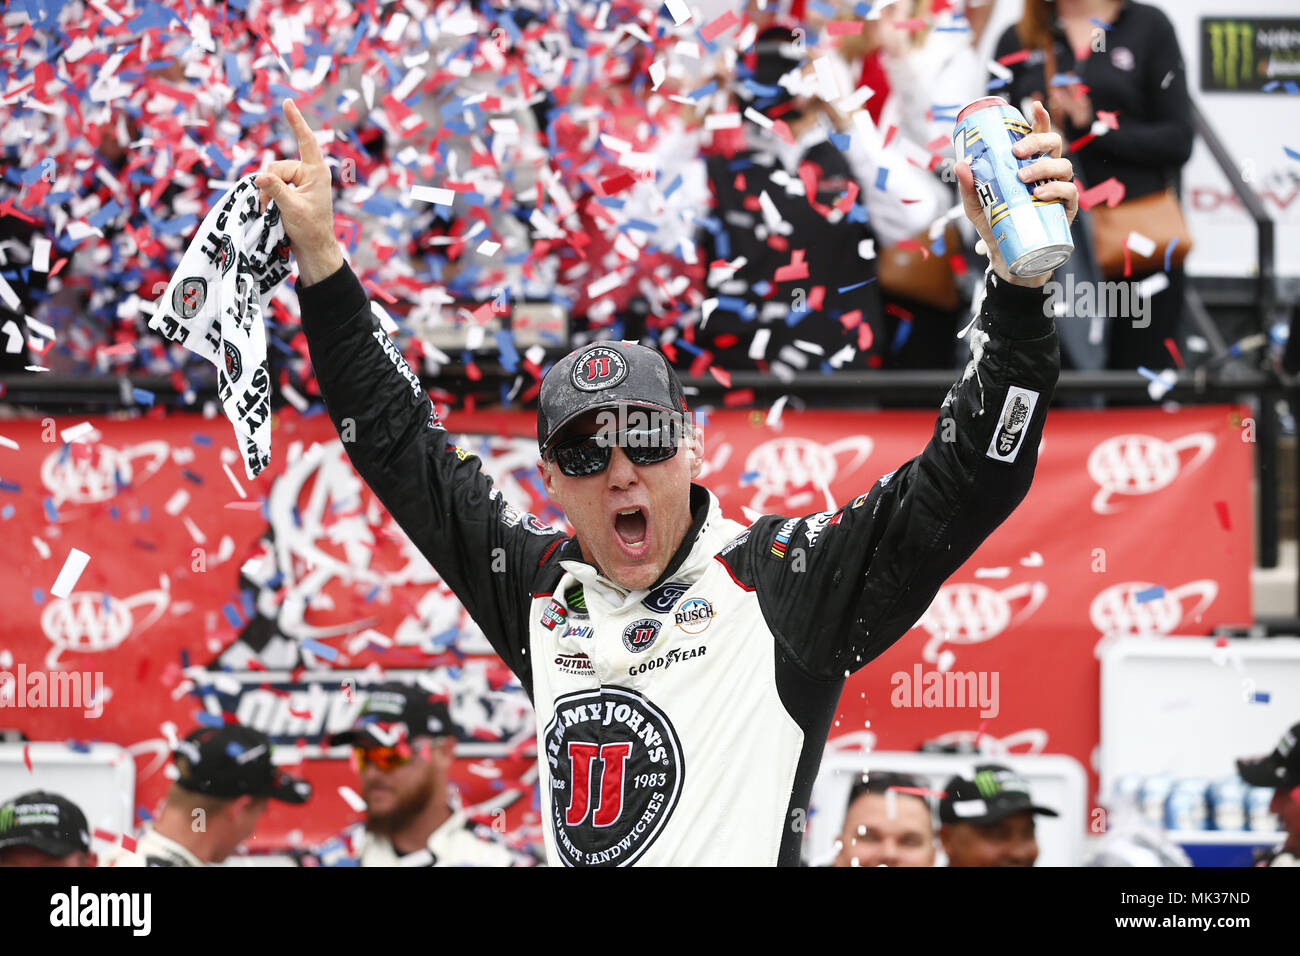 Dover, Delaware, USA. 6th May, 2018. KEVIN HARVICK (4) celebrates after winning the NASCAR Monster Energy Cup Series: AAA 400 Drive for Autism, at Dover International Speedway. Credit: Justin R. Noe Asp Inc/ASP/ZUMA Wire/Alamy Live News Stock Photo